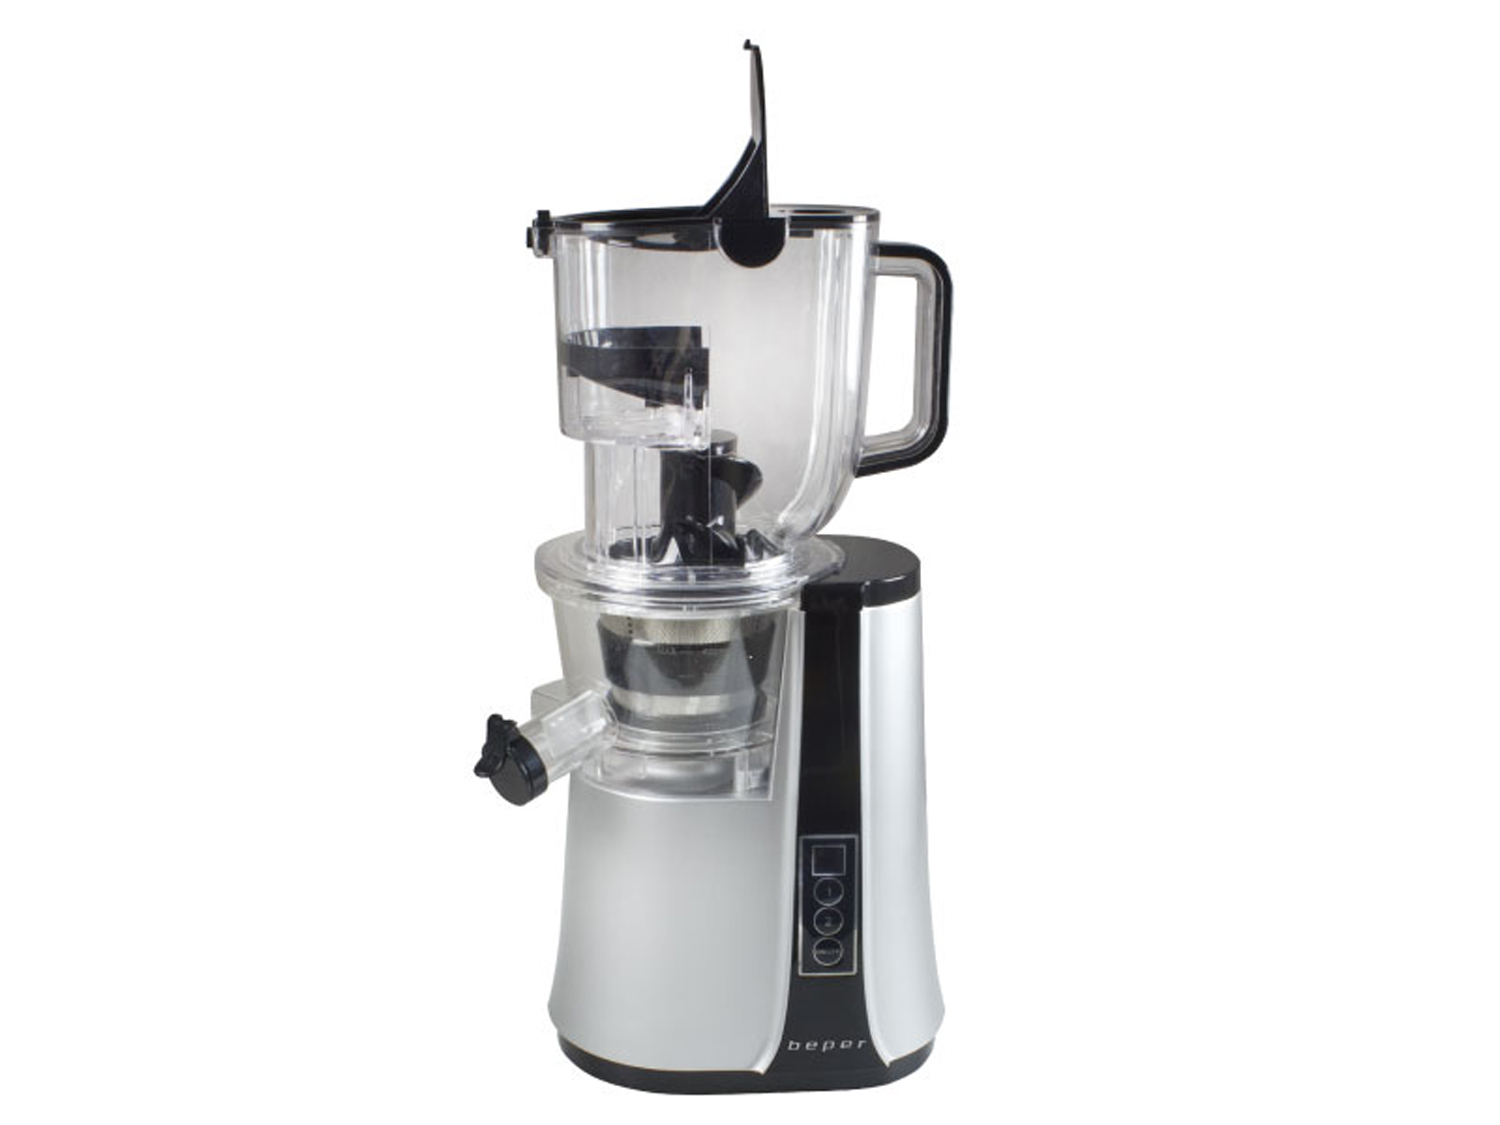 90.422, slow juicer, stainless steel